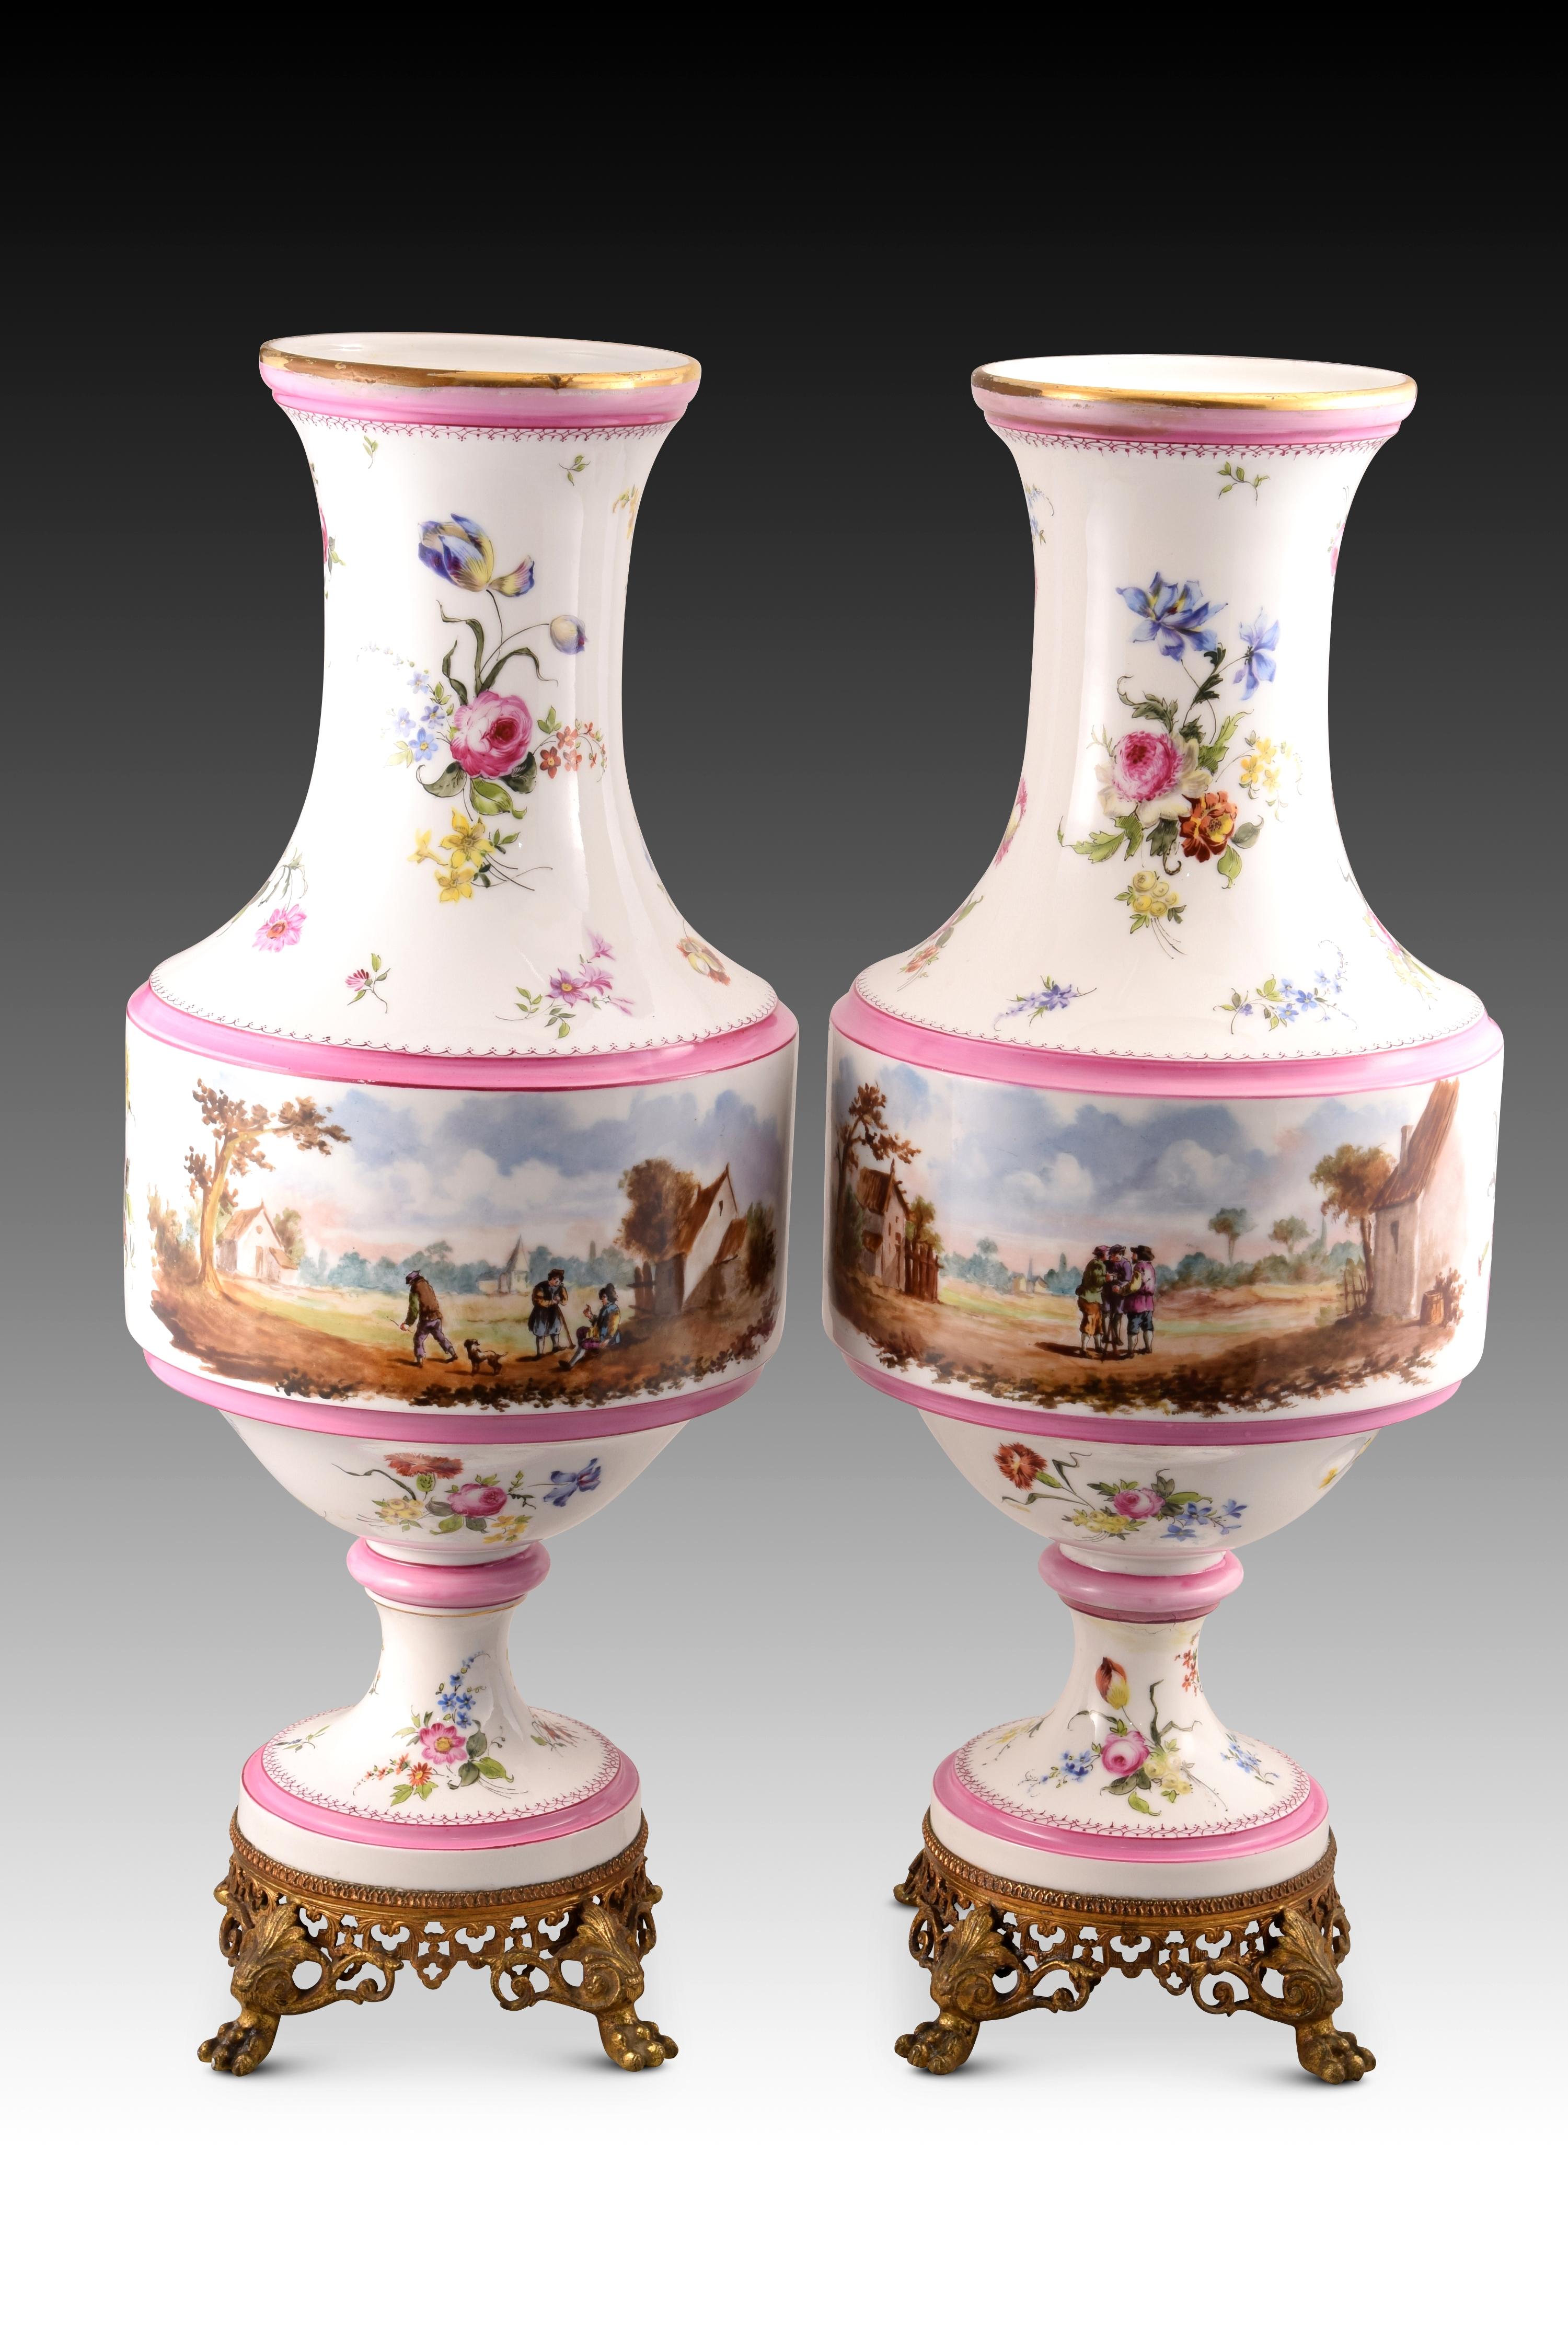 Neoclassical Revival Pair of Vases, Porcelain, Metal, 19th Century For Sale